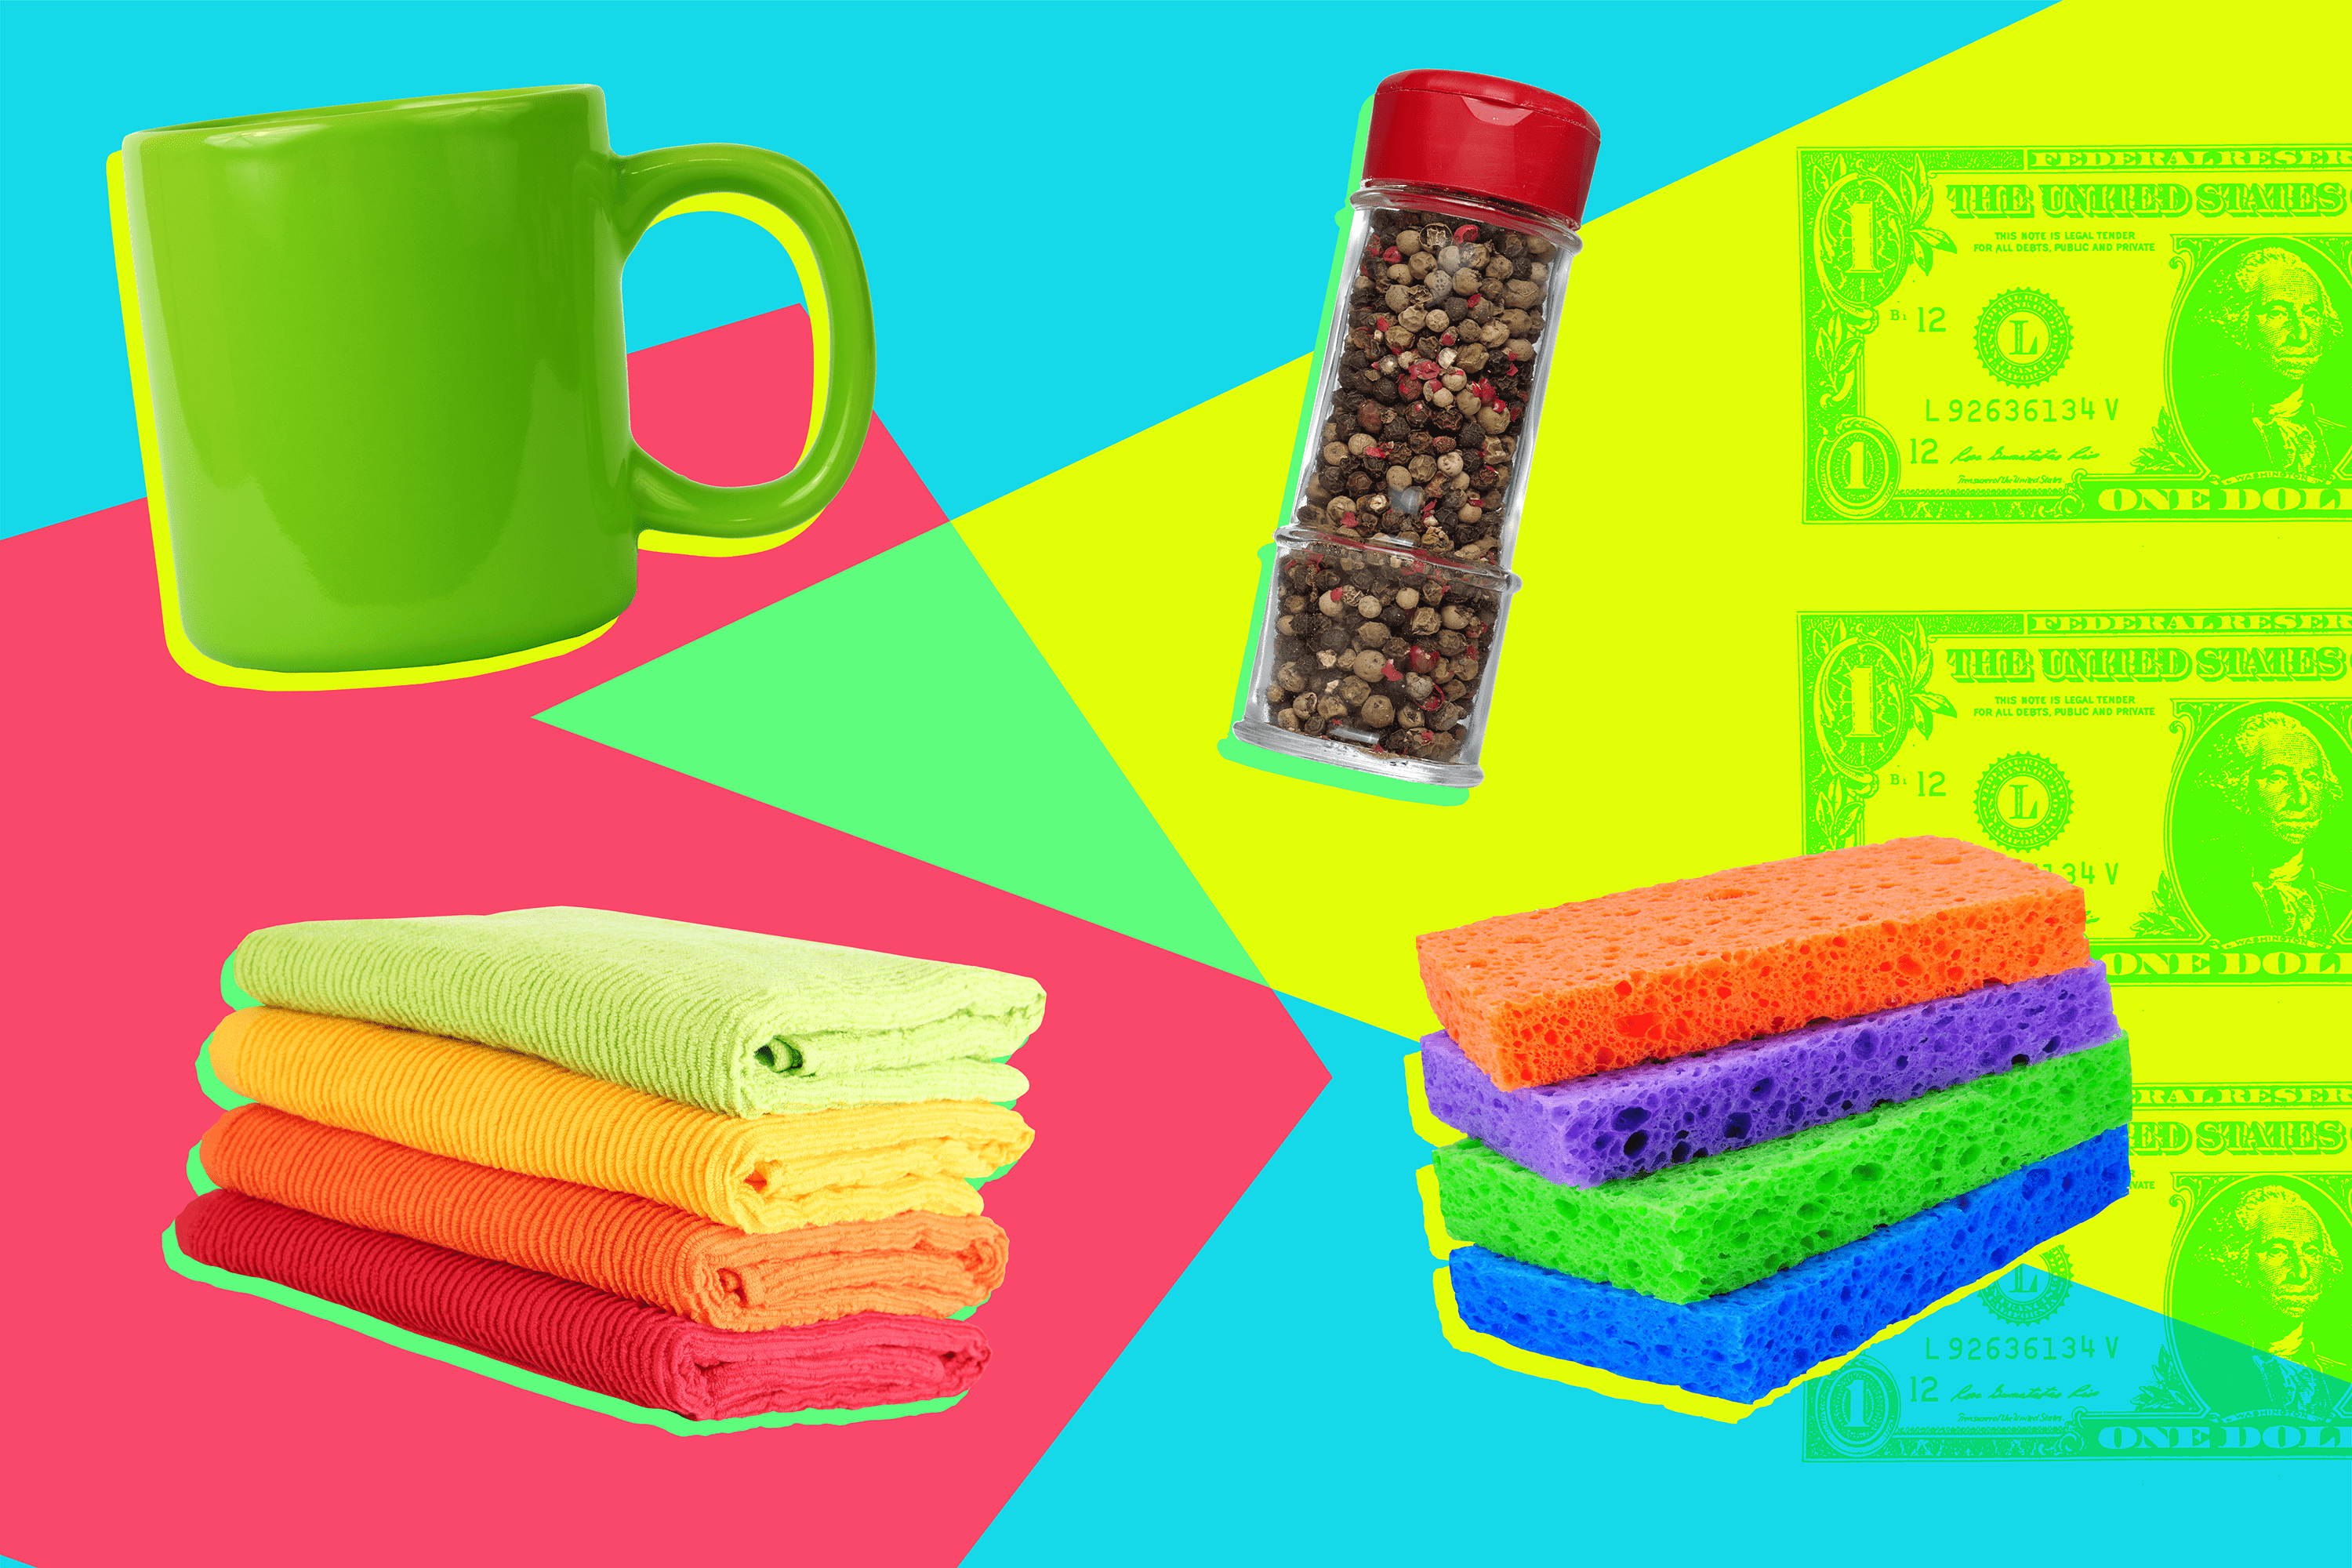 10 useful kitchen items from ¥100 stores that are actually worth buying